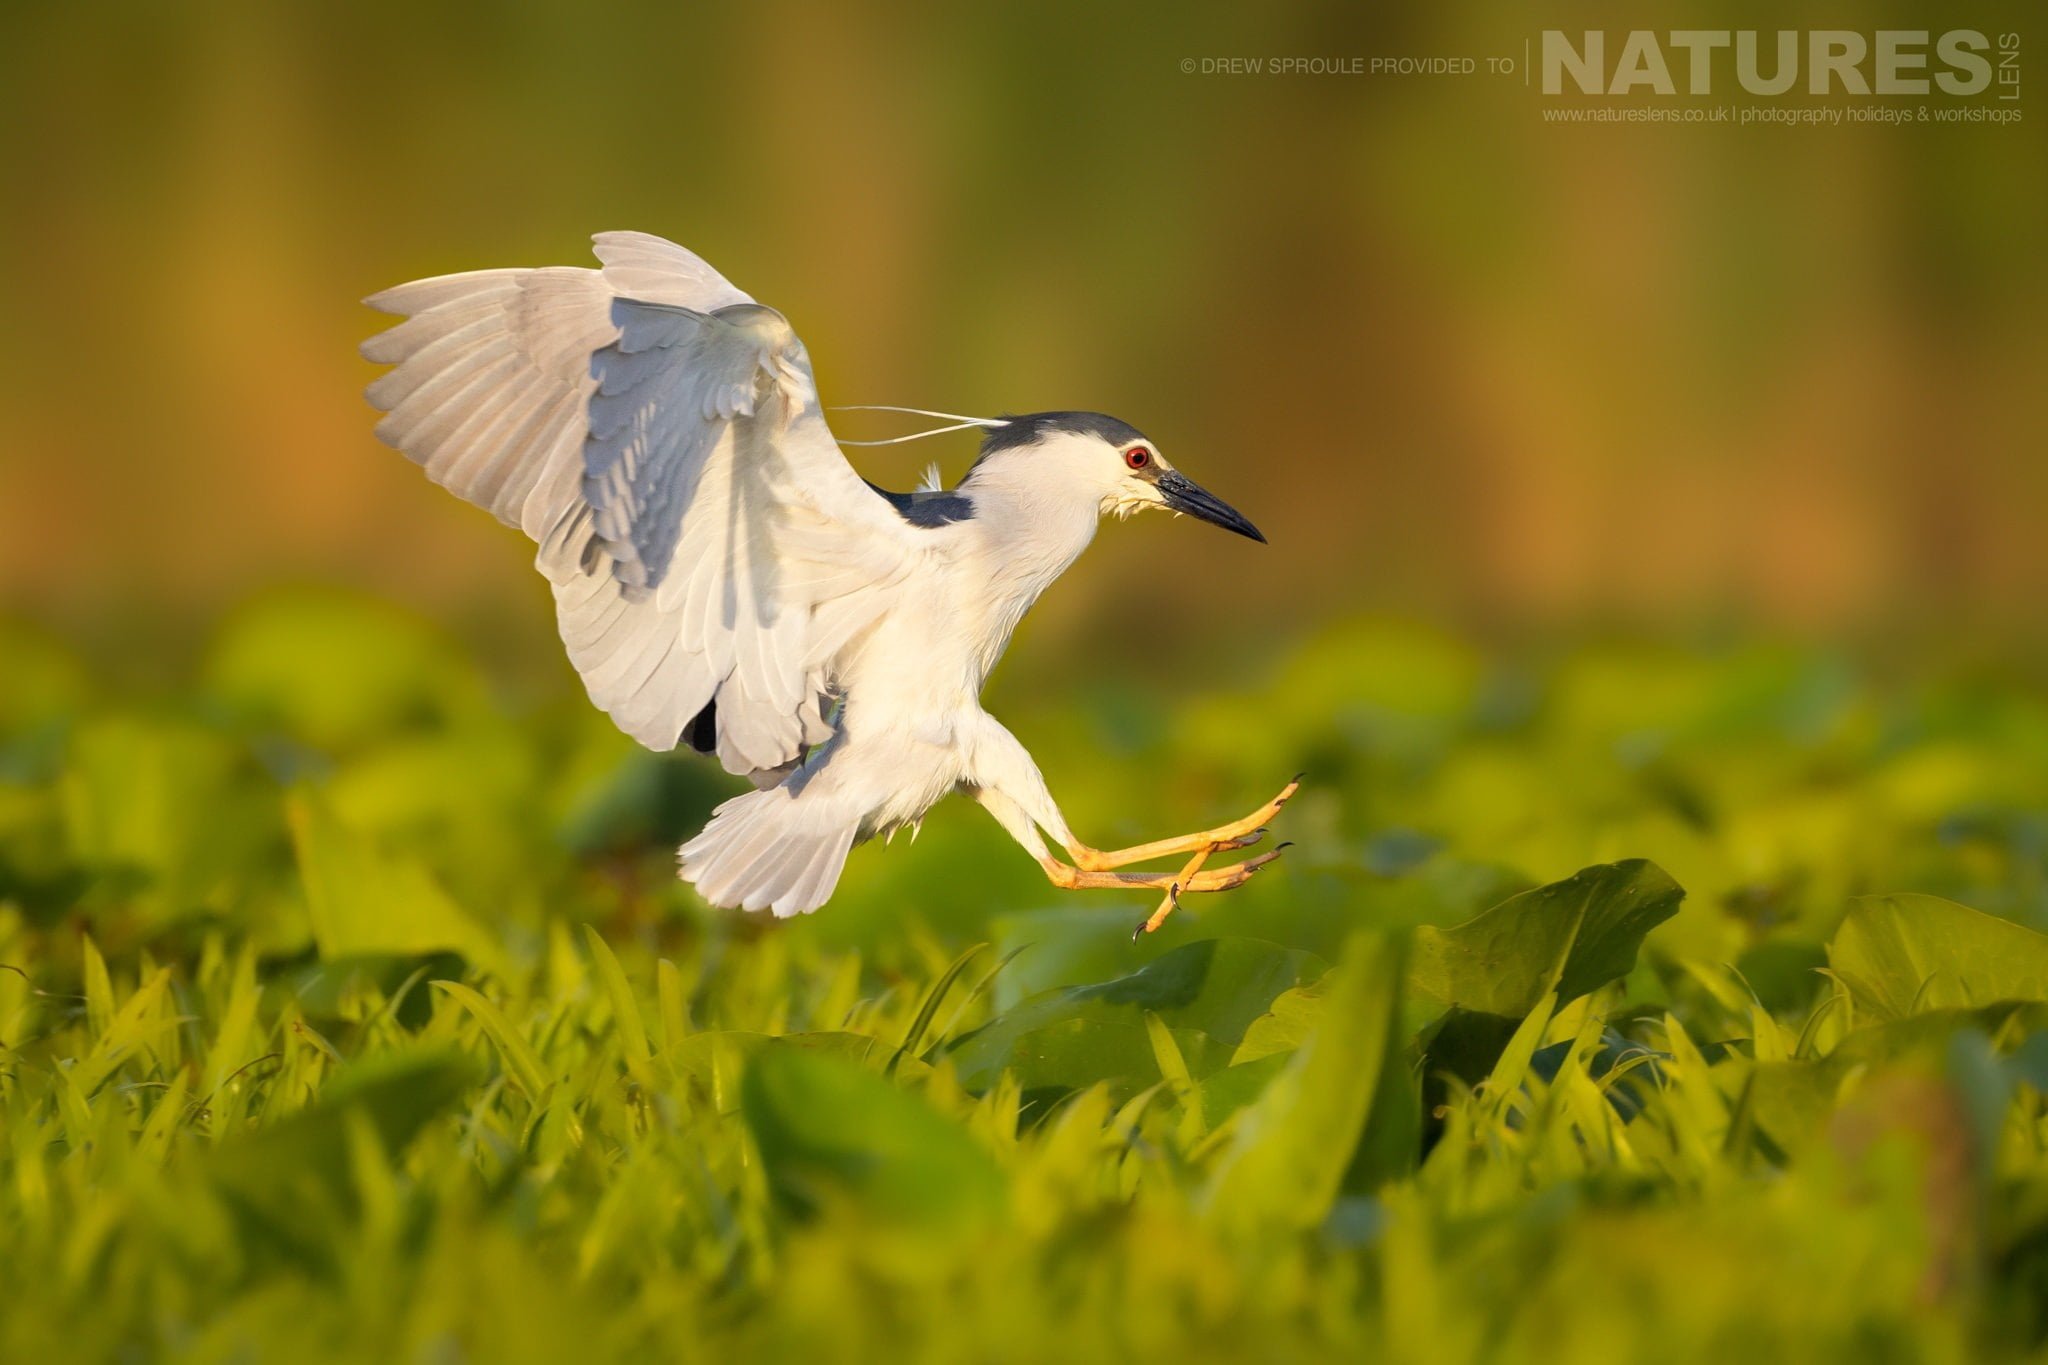 A Gorgeous Night Heron Comes In For A Landing Typical Of The Kind Of Image You Will Capture During The Birdlife Of The Danube Delta Photography Trip